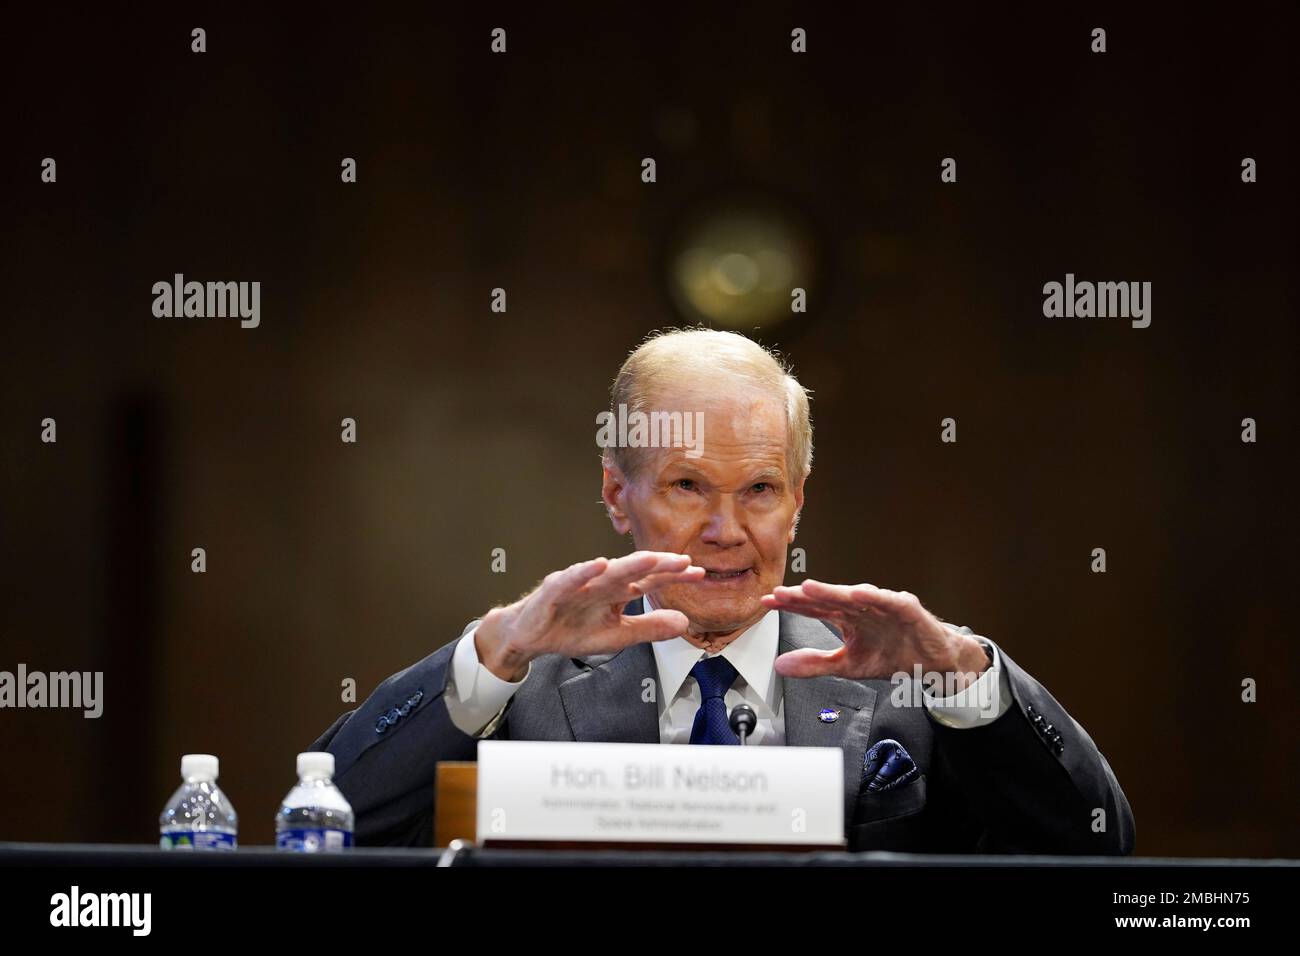 NASA Administrator Bill Nelson, a former Senator from Florida, speaks during a Senate Appropriations subcommittee hearing on the proposed budget estimates and justification for fiscal year 2023 for the National Aeronautics and Space Administration and the National Science Foundation, Tuesday, May 3, 2022, on Capitol Hill in Washington. (AP Photo/Mariam Zuhaib) Stock Photo